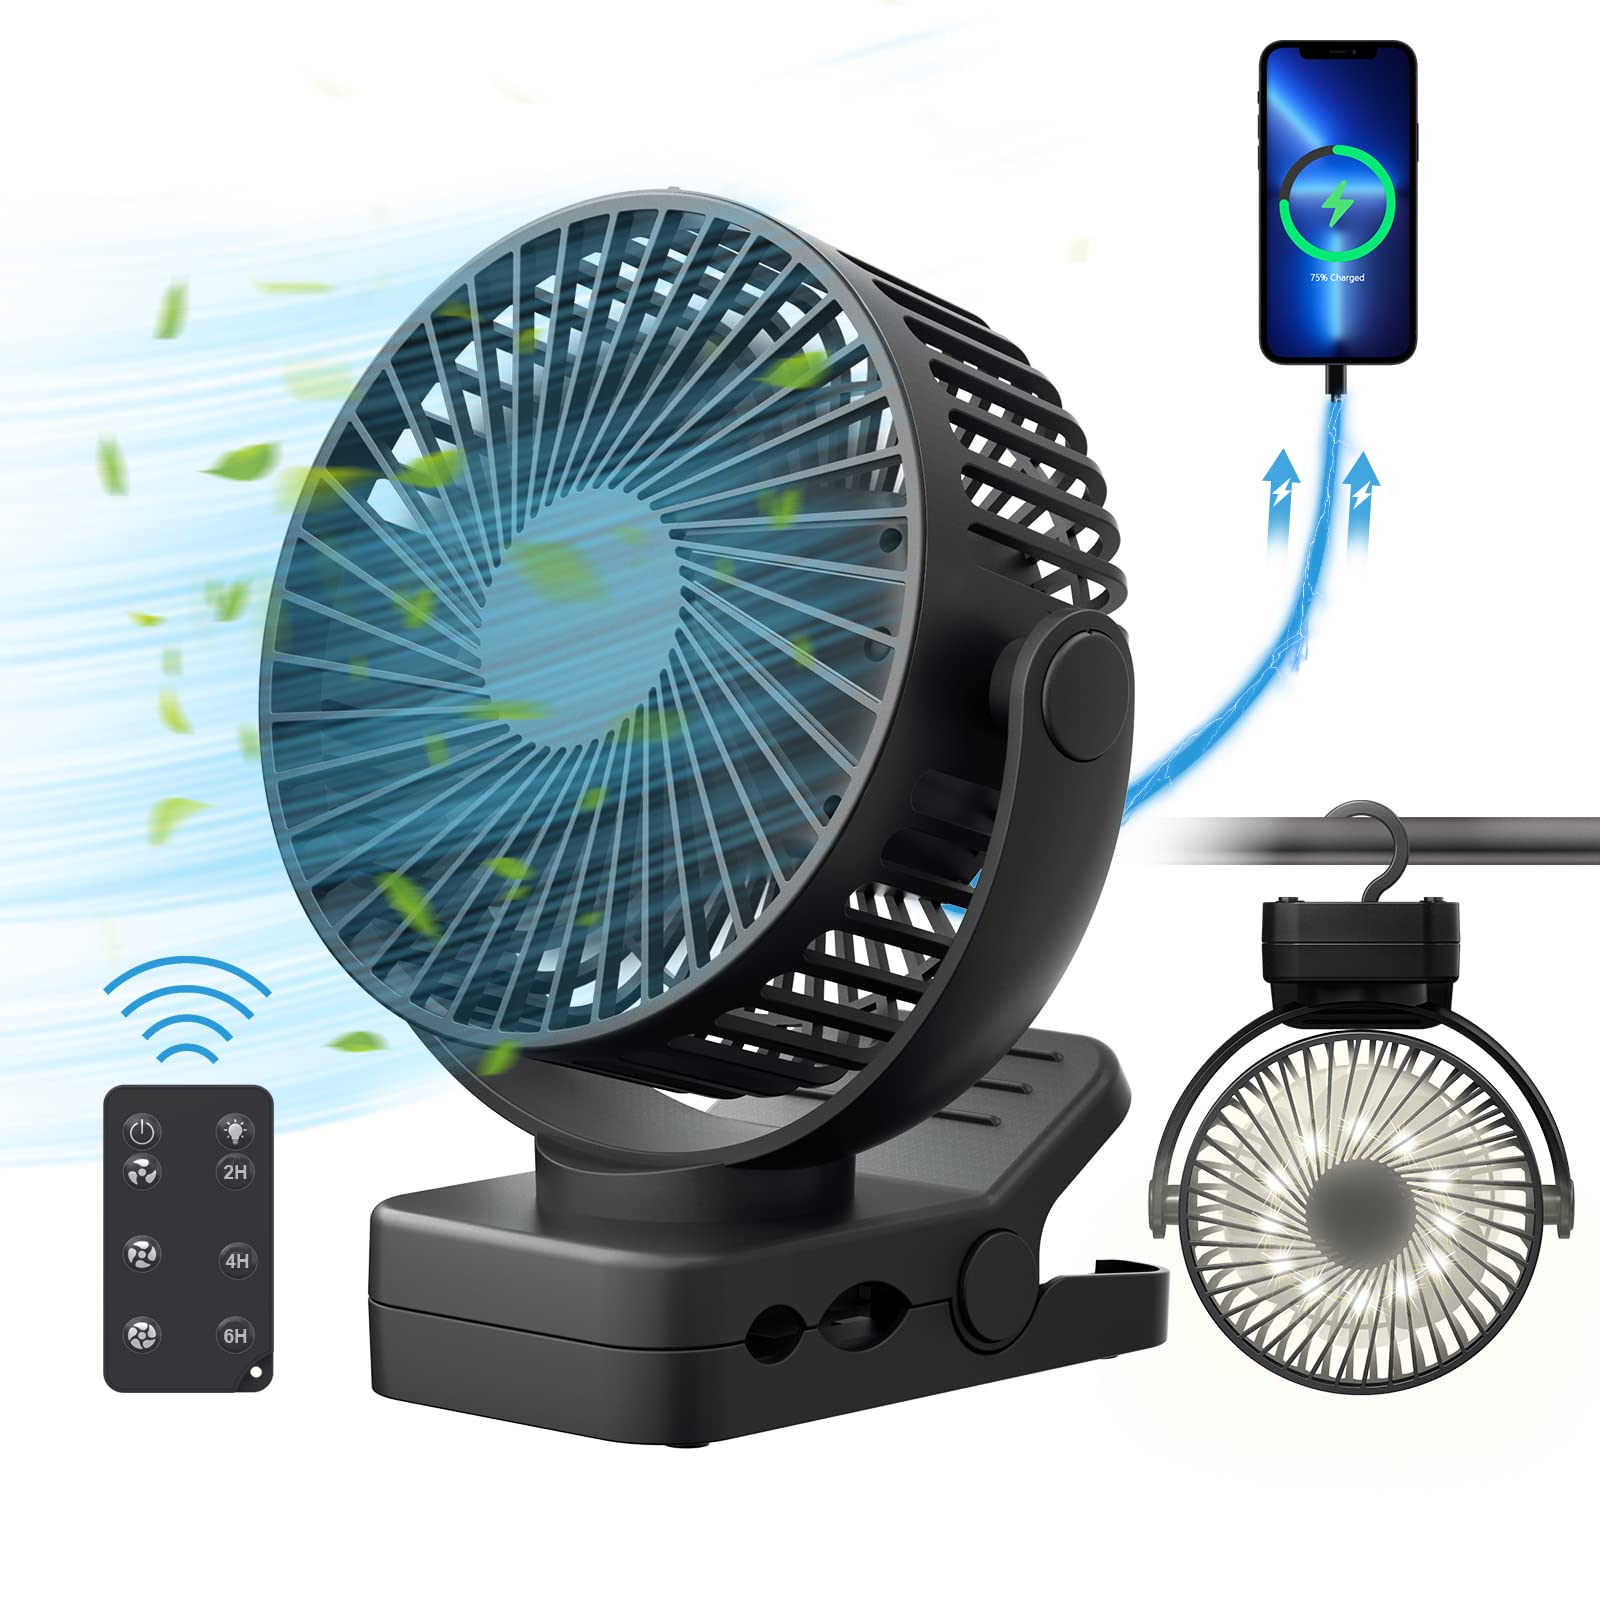 Portable Fan with Remote Control & Timer & LED Lights, 60hrs 12000mAh USB Rechargeable Battery Fan Could Clamp/Hanging/Stand Up, Small Clip on Fan for Baby Stroller, Bed, Desk, Camping Tent, Trave